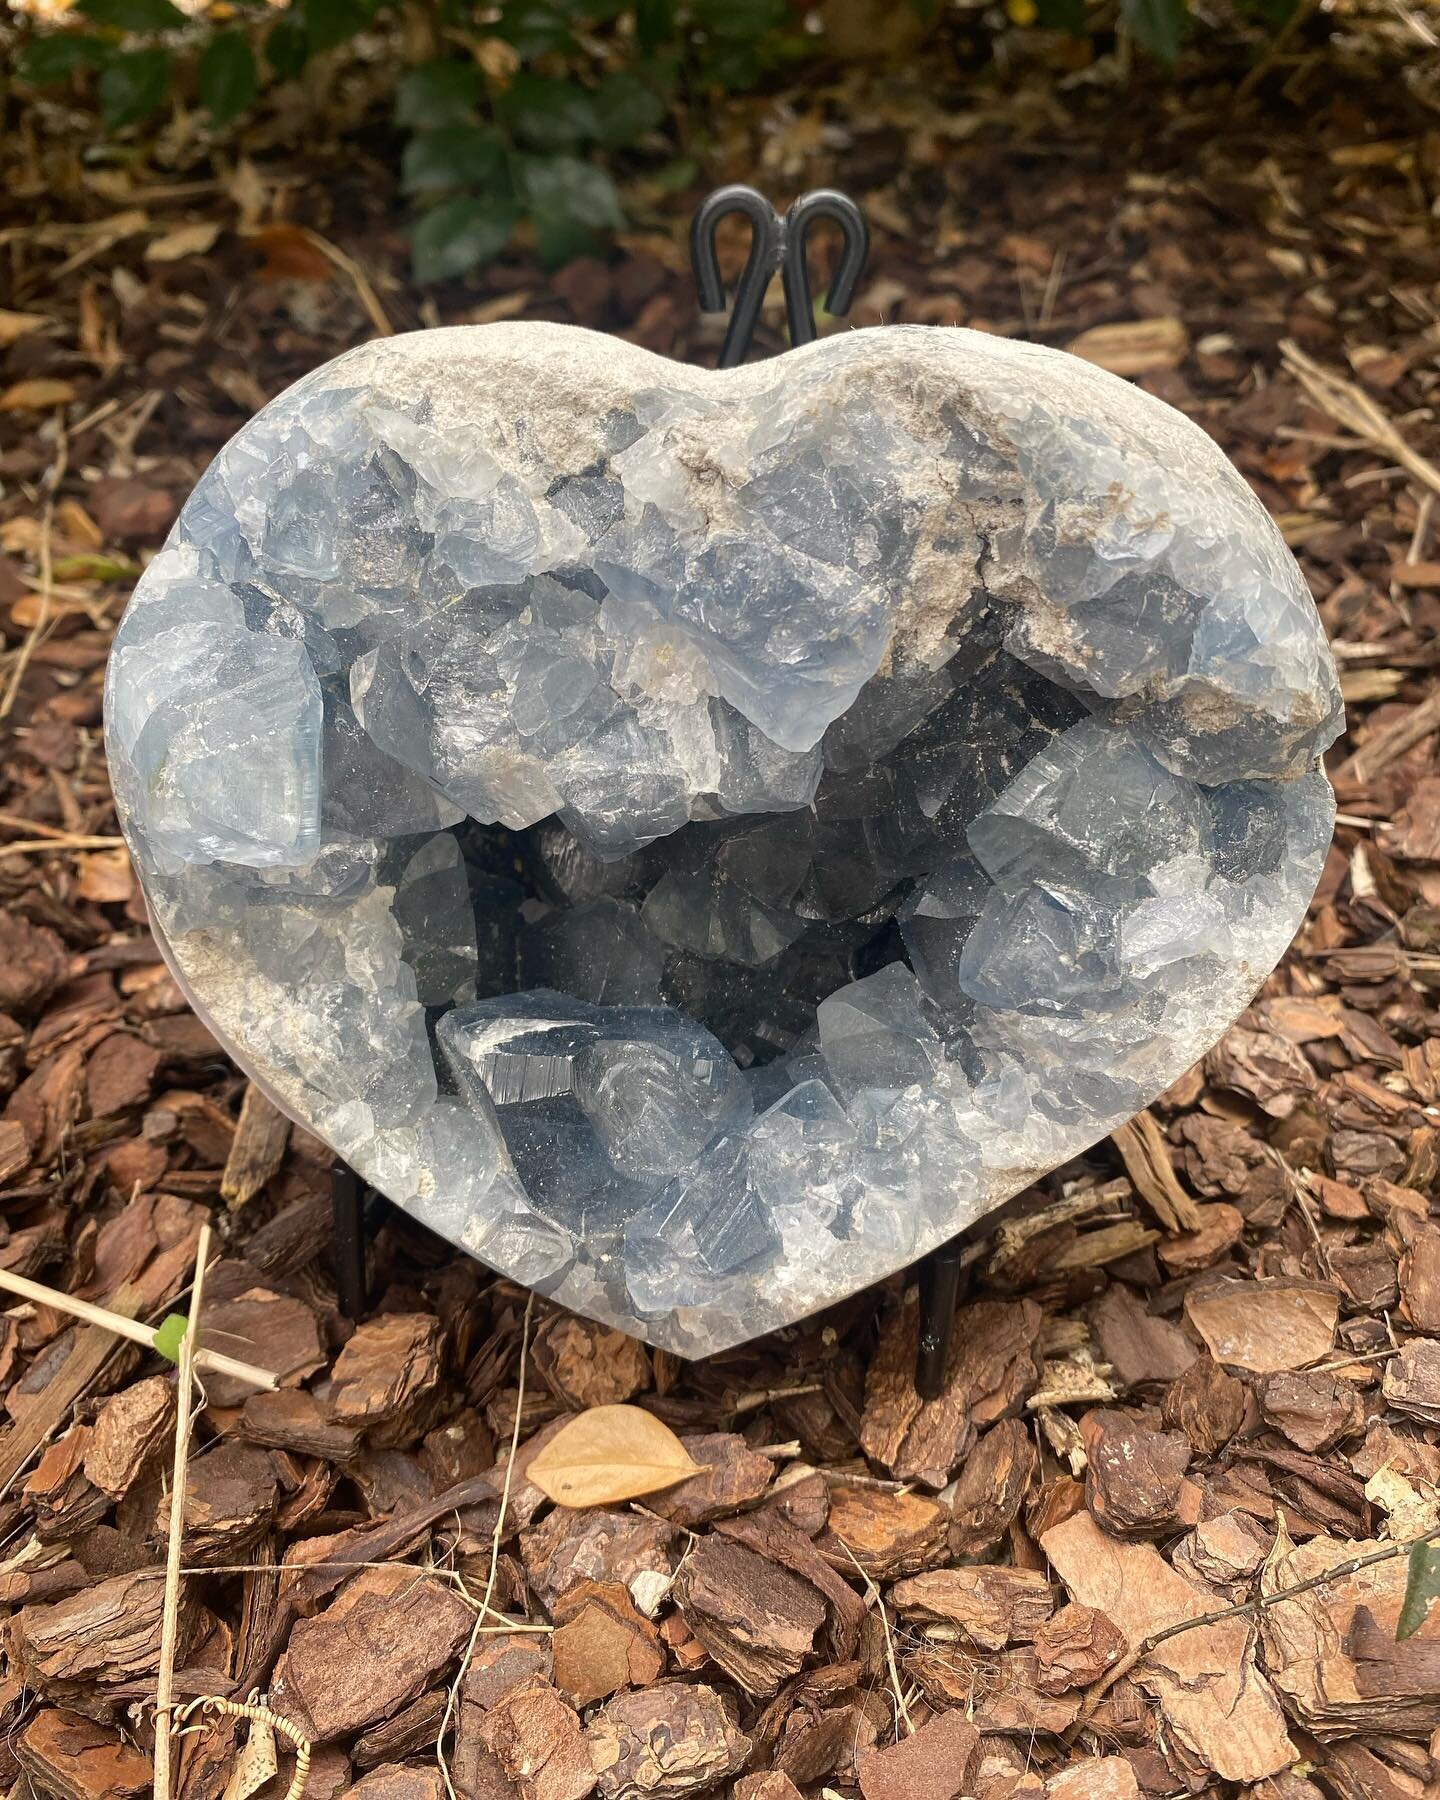 Did you know on my website on the explore button, there is a comprehensive A-Z of lots of different crystals, meanings and properties etc. 

Click on the &lsquo;EXPLORE&rsquo; button 
Www.lunasalt.com.au

#celestite #blue #crystals #knowlegde